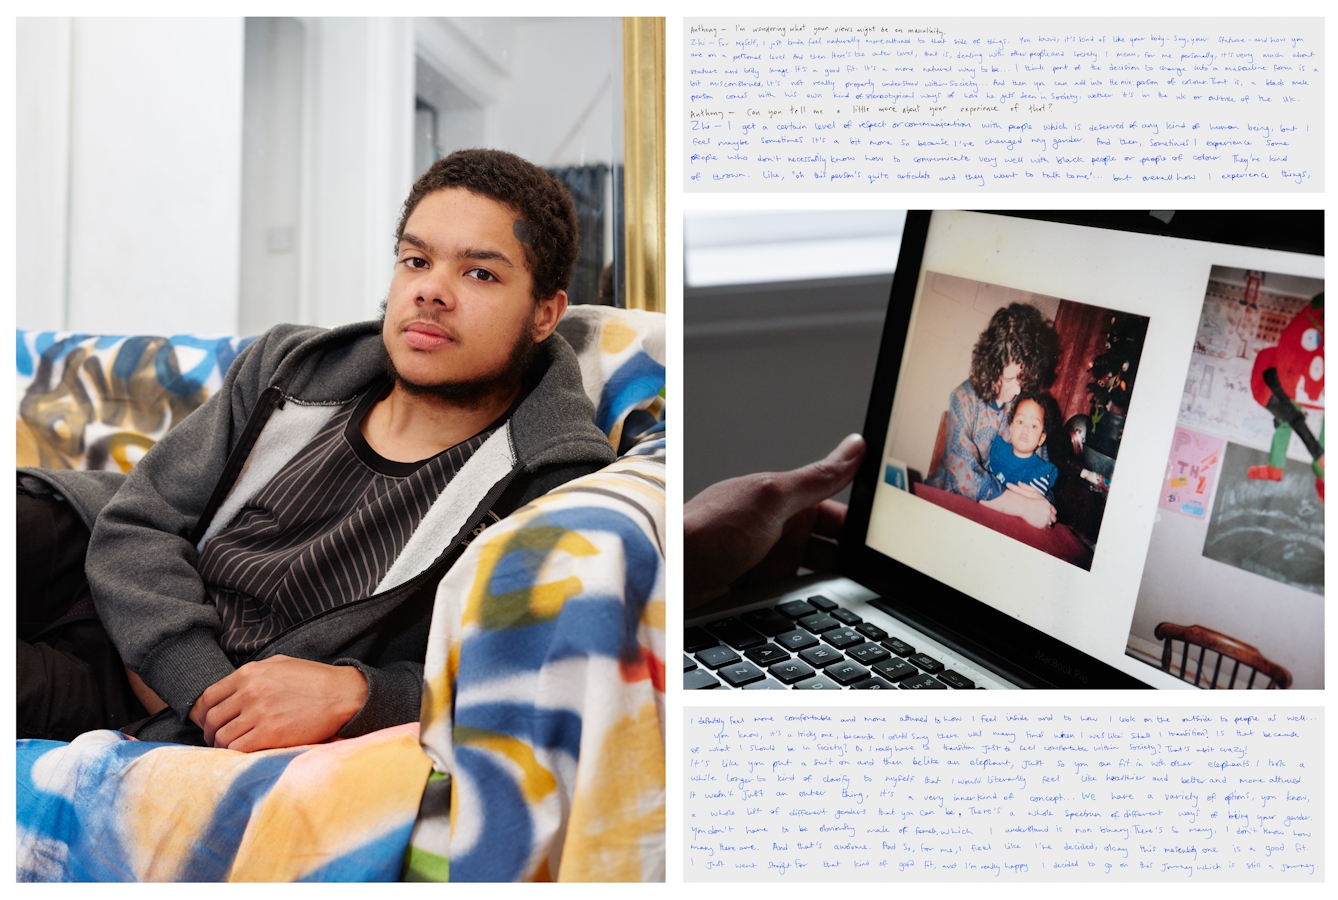 Photograph of an individual relaxing on a sofa in a living room. They are looking straight to camera. To the right of this photograph is another photograph showing a hand touching a laptop screen on which is displayed a family photo of a mother and a toddler. Above and below this image are images of handwritten texts.